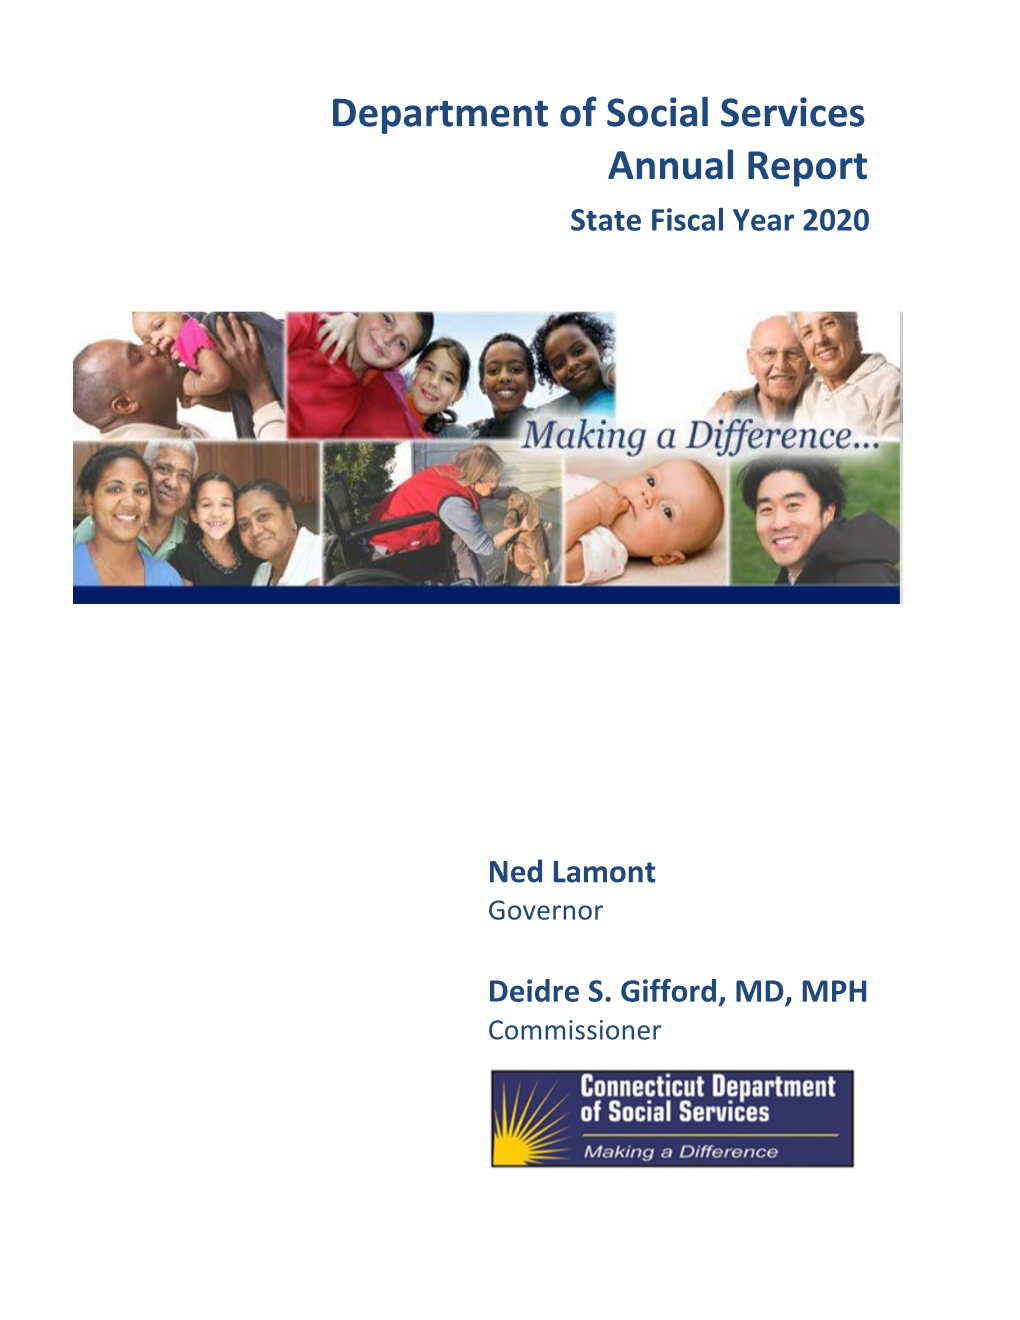 Department of Social Services Annual Report